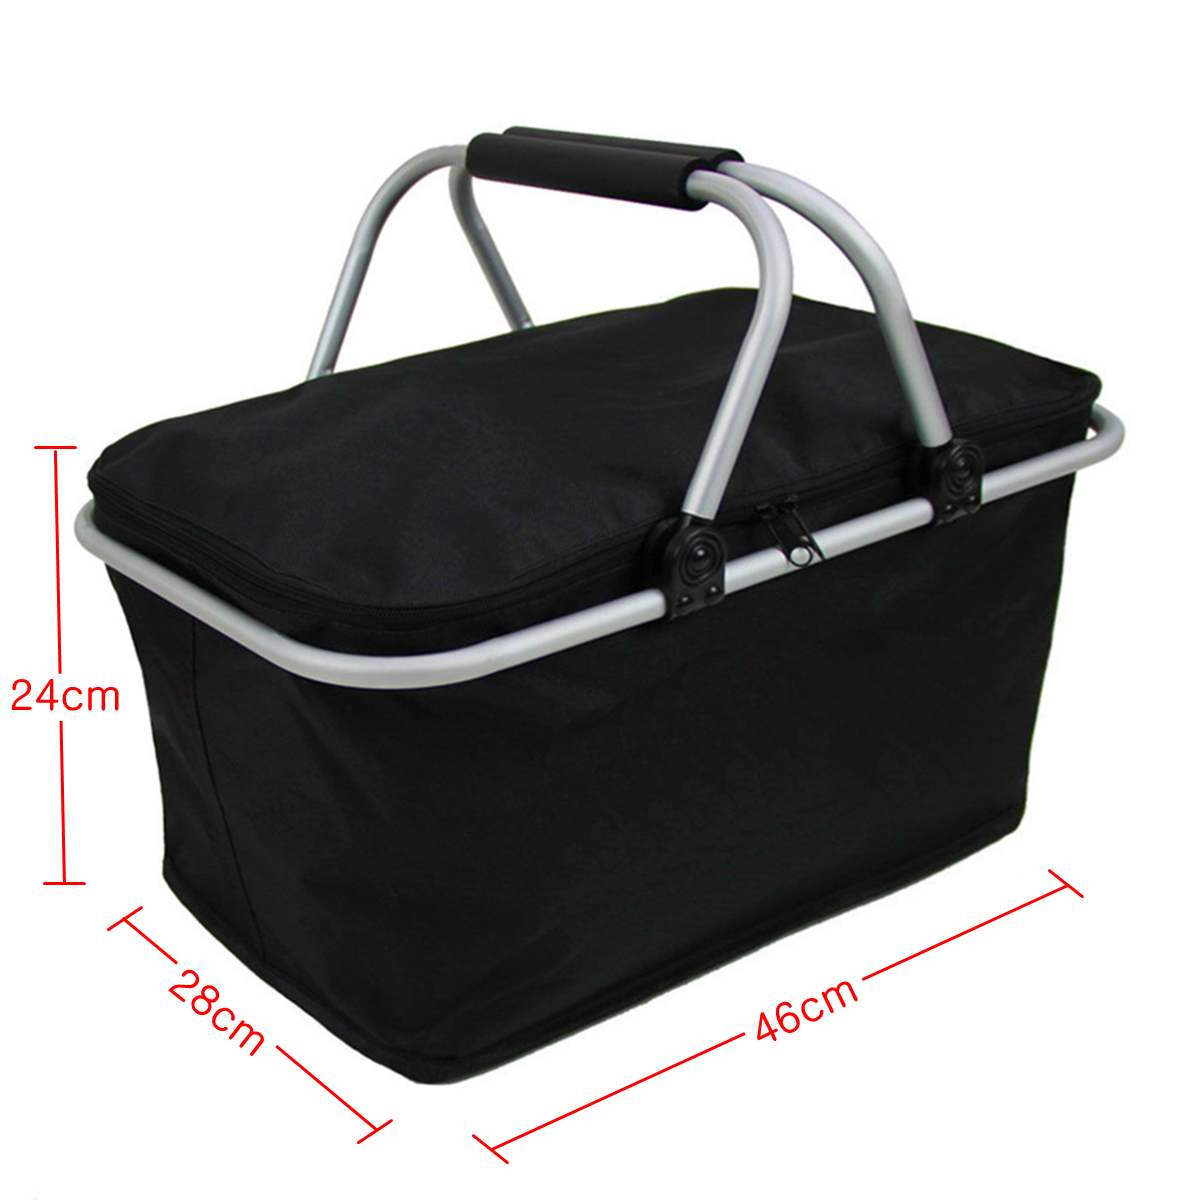 30L Picnic Basket Picnic Bag Insulated Heat Cooler Strong Aluminum Frame Waterproof Lining and Collapsible For Camping Picnic